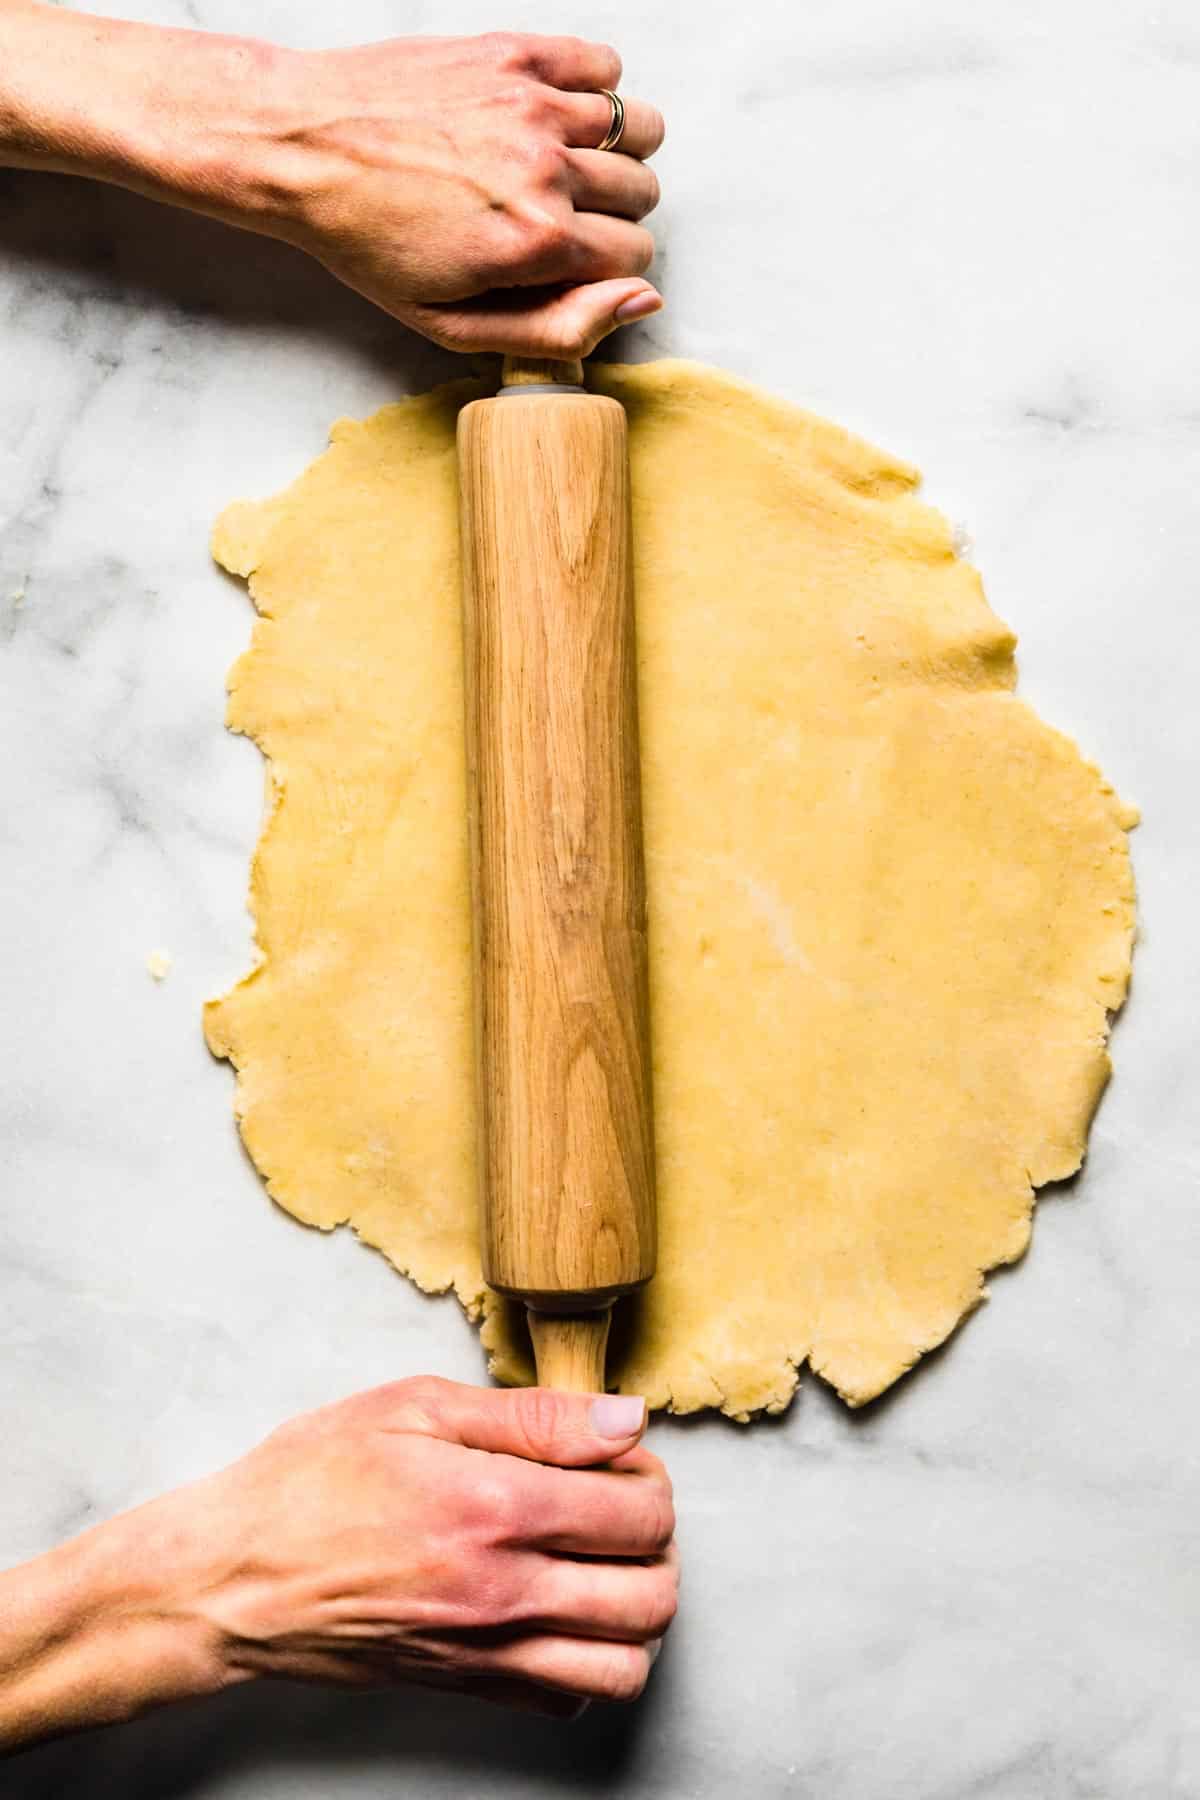 A woman rolling out gluten free pie crust dough with a wooden rolling pin.